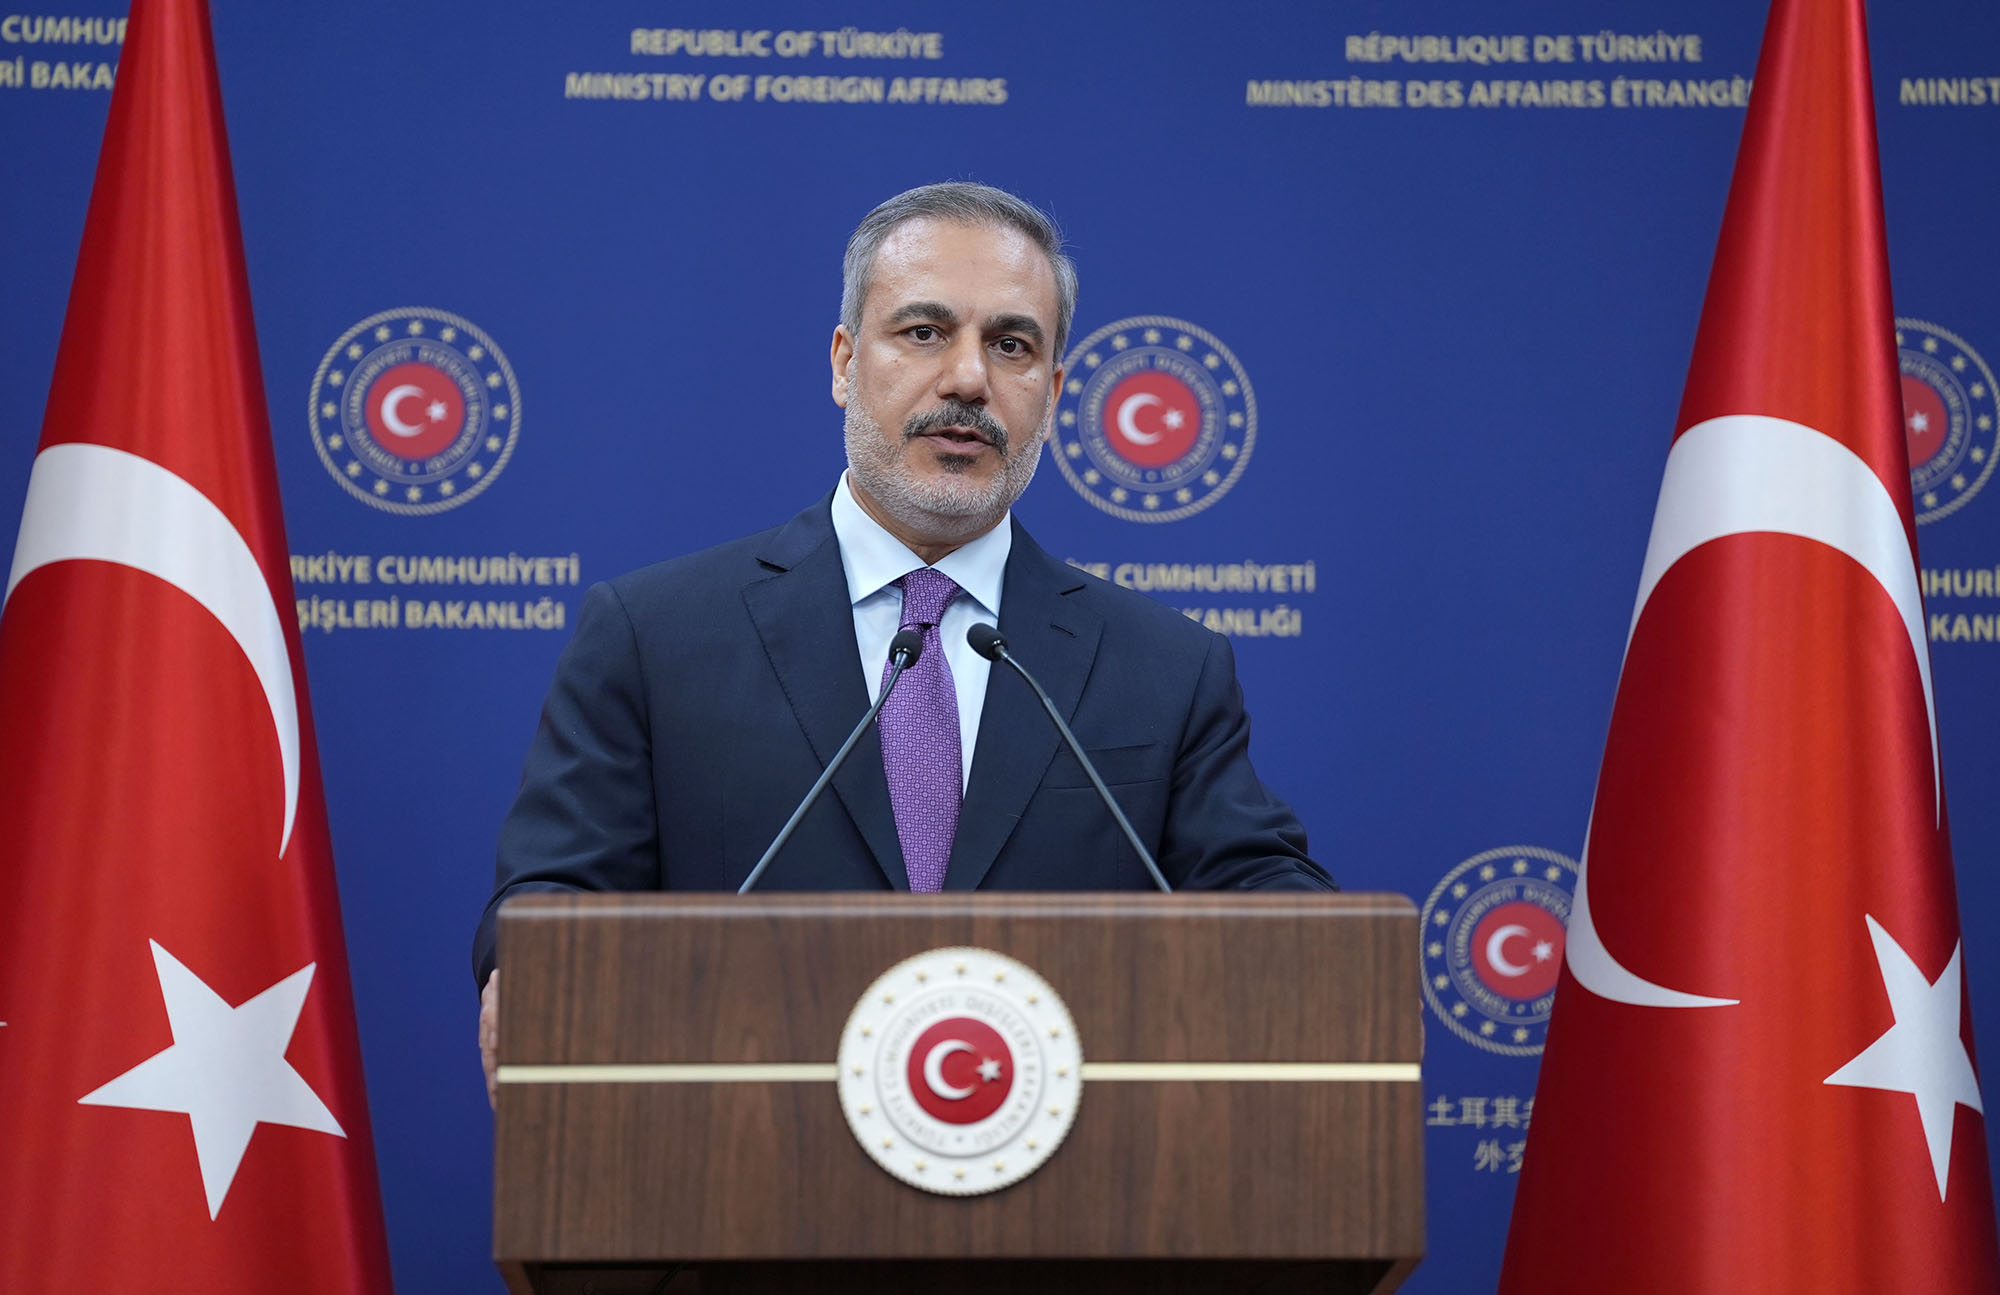 Turkish Foreign Minister Hakan Fidan holds a press conference at ministry building in Ankara, Turkey, on April 8.